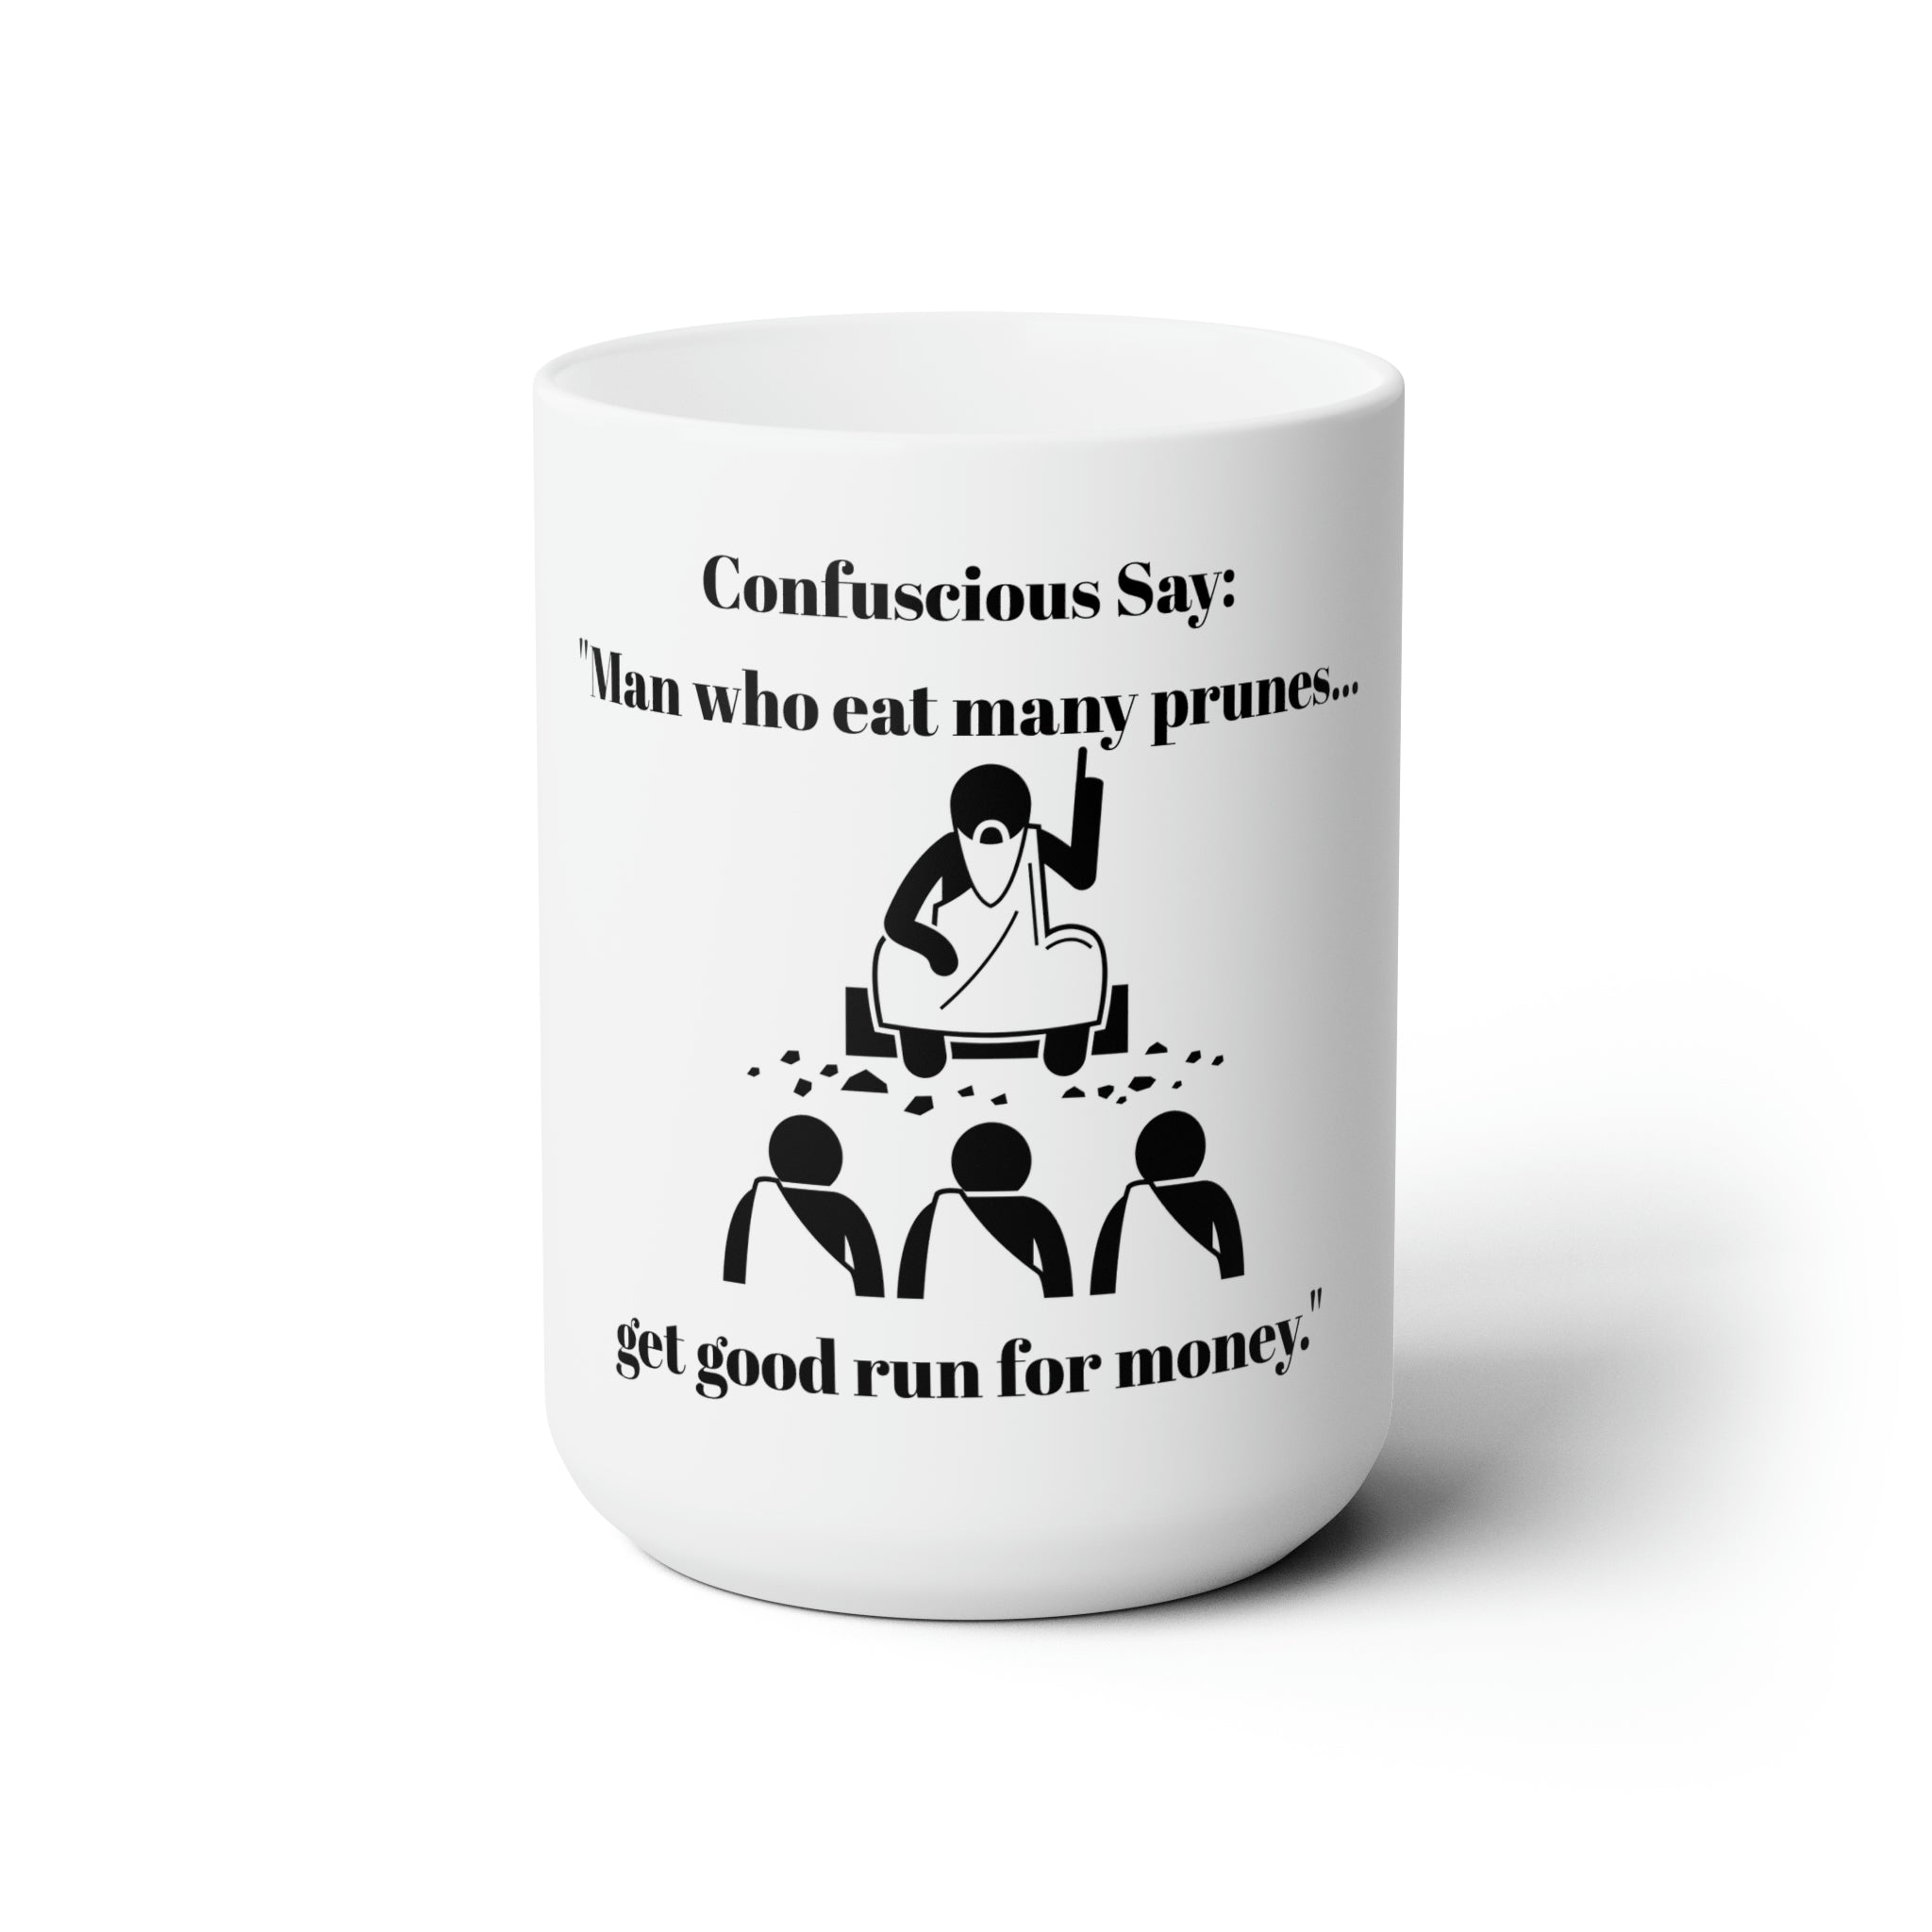 Ceramic Mug 15oz with Unique Funny Confucius Saying - Hilarious Office Gag Gift - Ideal for Coffee Lovers, Tea Drinkers, and Philosophers